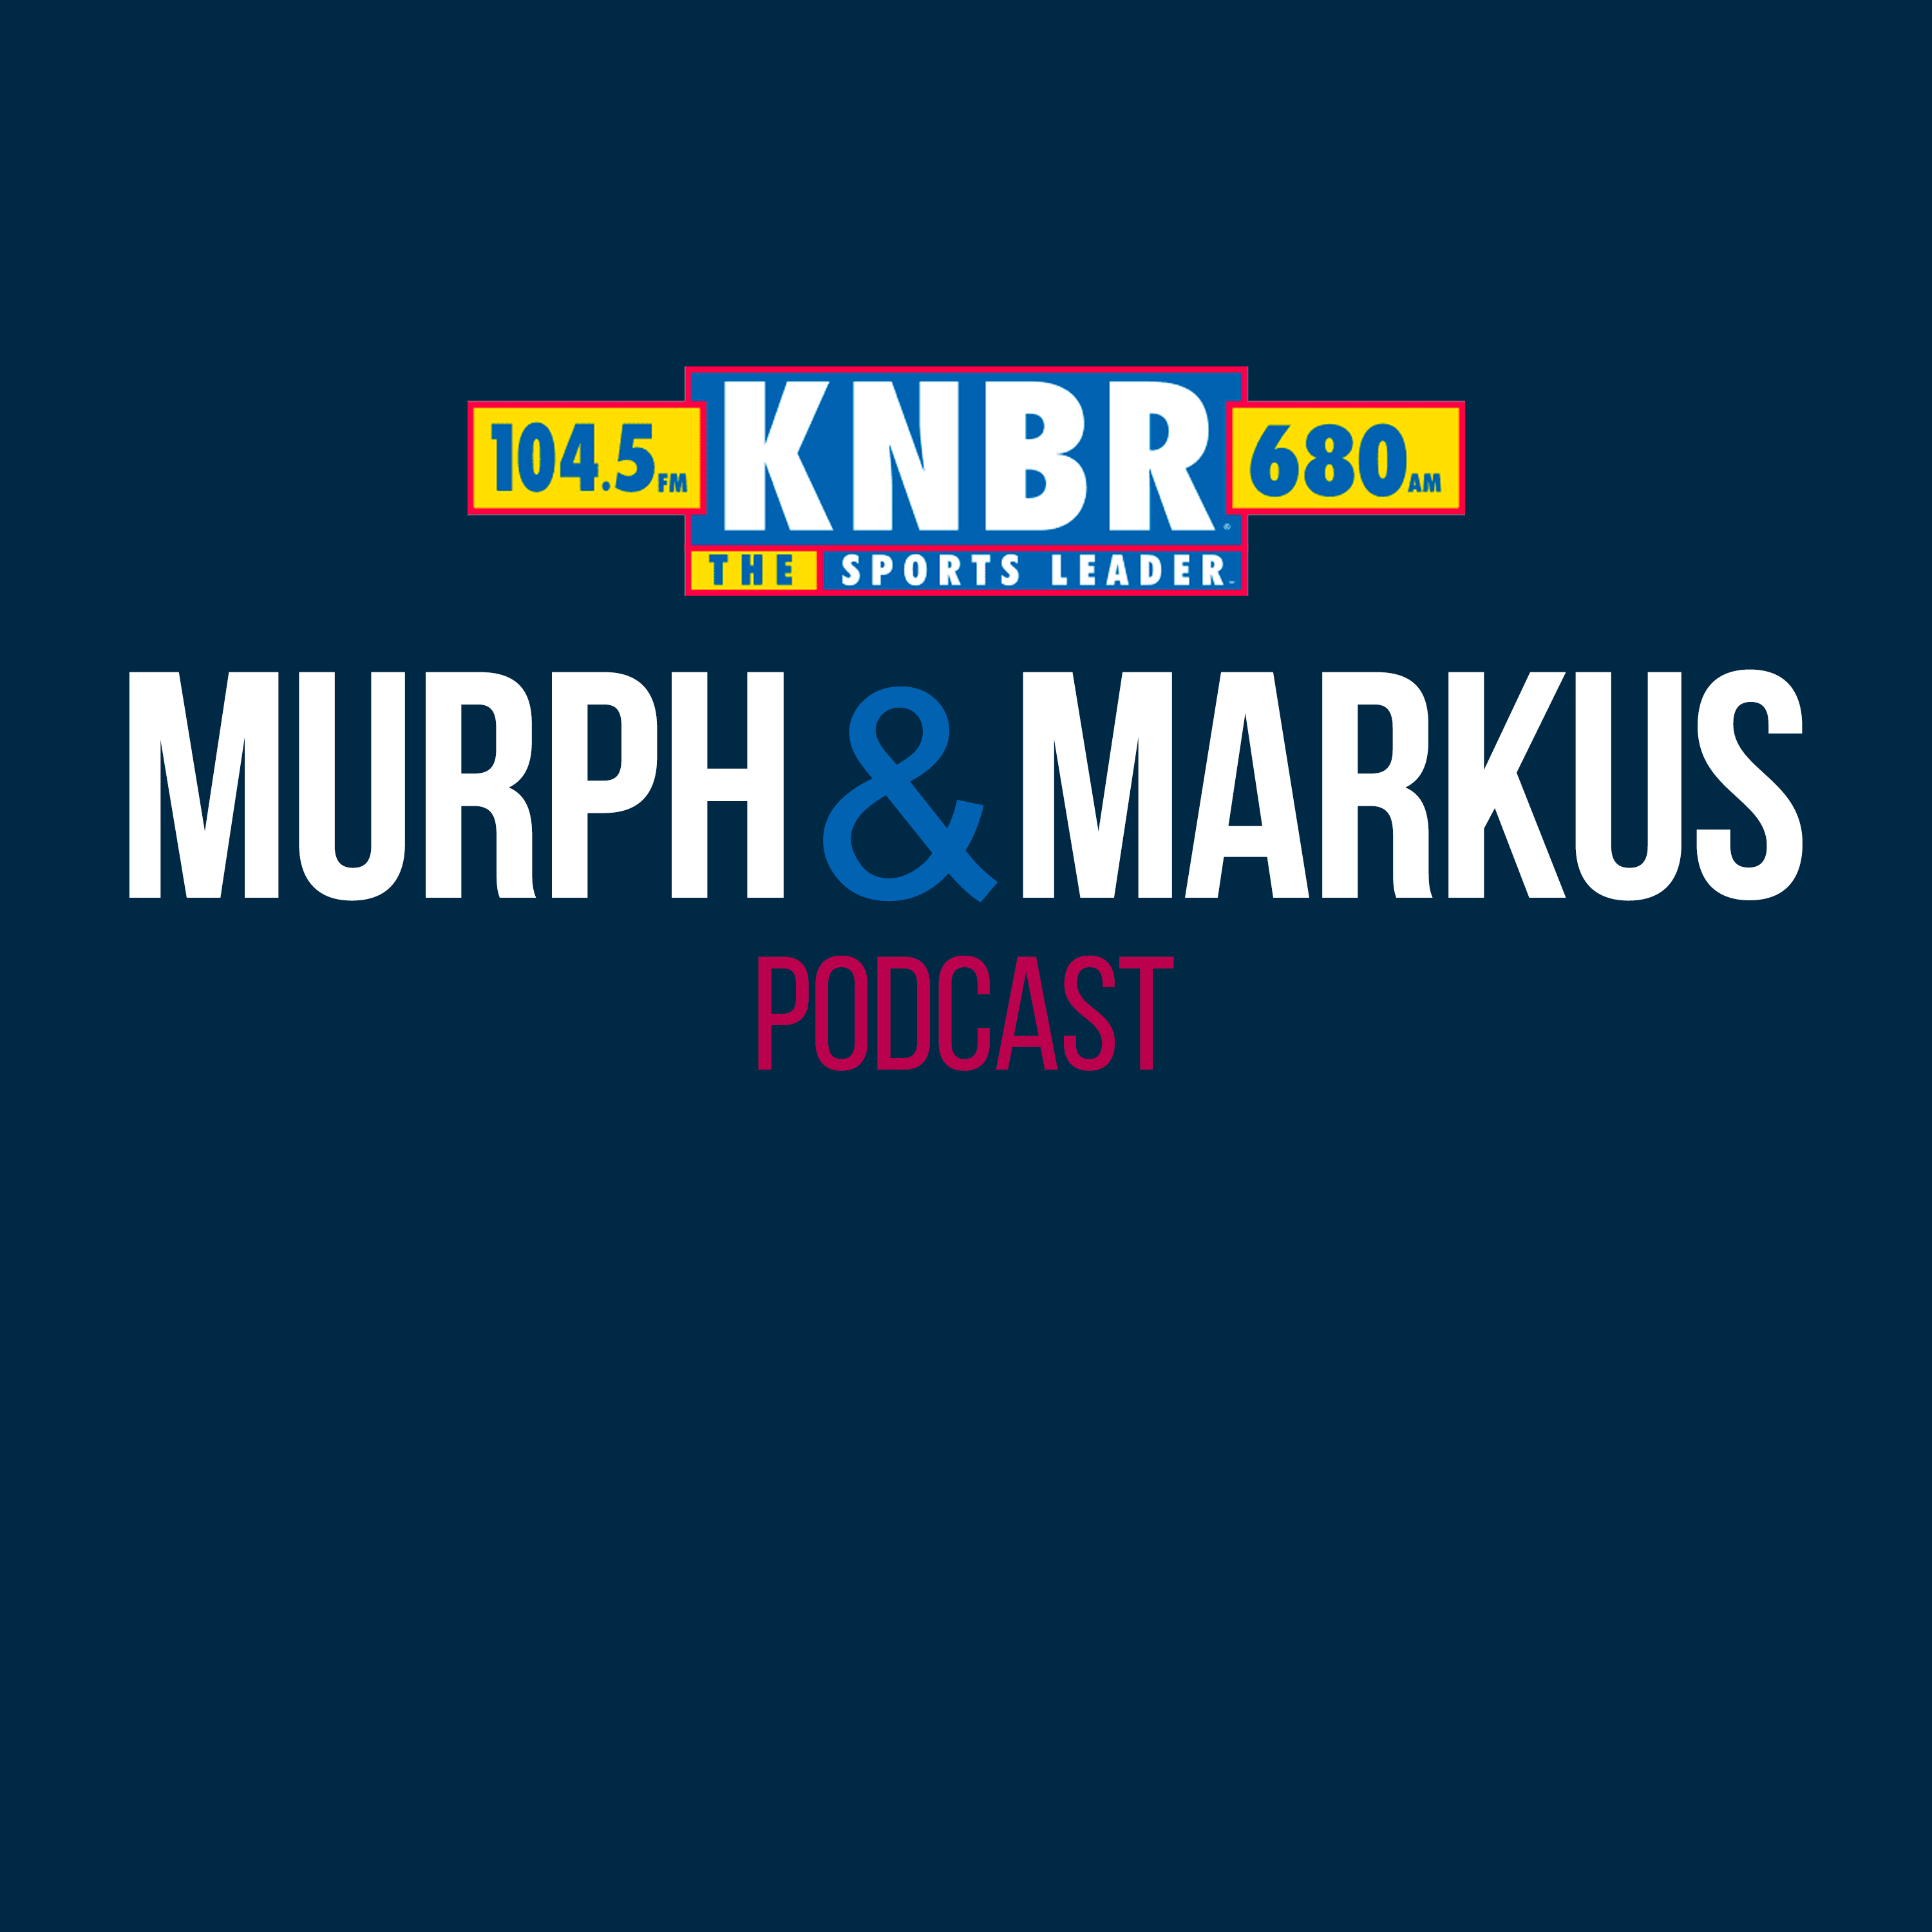 1-18 Bryant Young joins Murph & Markus to break down the Packers/Niners playoff game and share some of his favorite memories from the rivalry